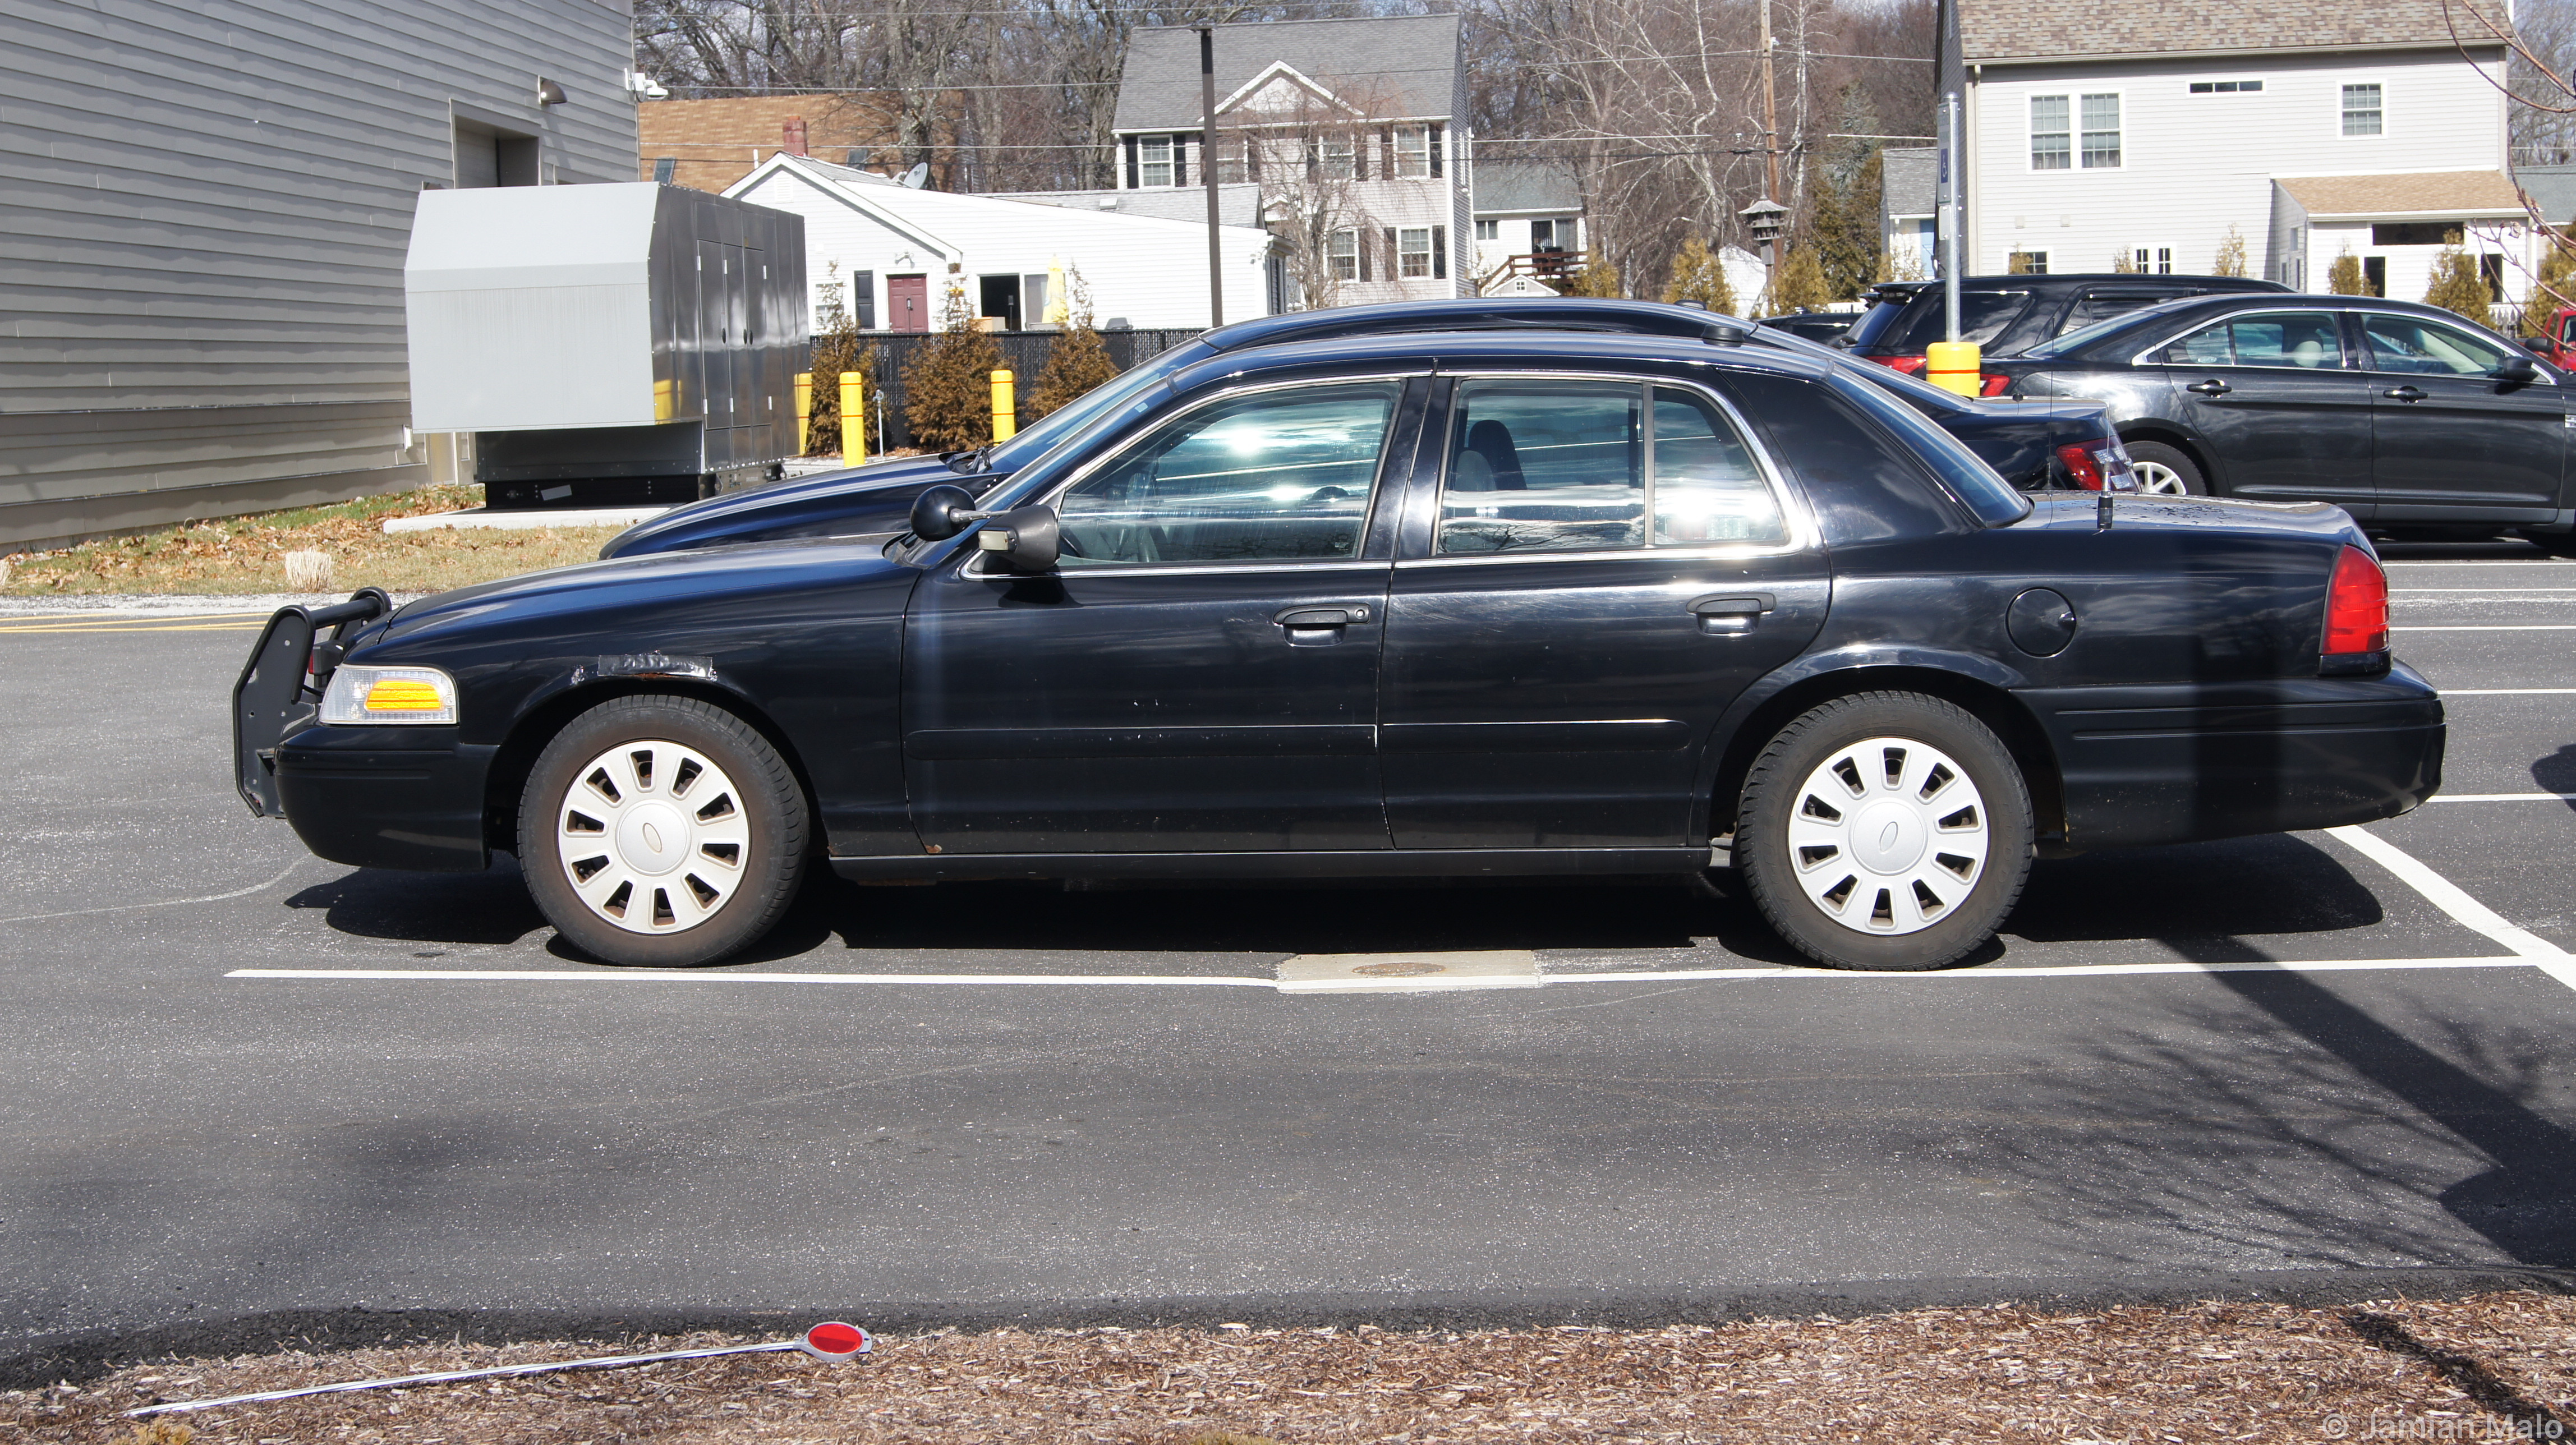 A photo  of Cumberland Police
            Unmarked Unit, a 2006-2008 Ford Crown Victoria Police Interceptor             taken by Jamian Malo